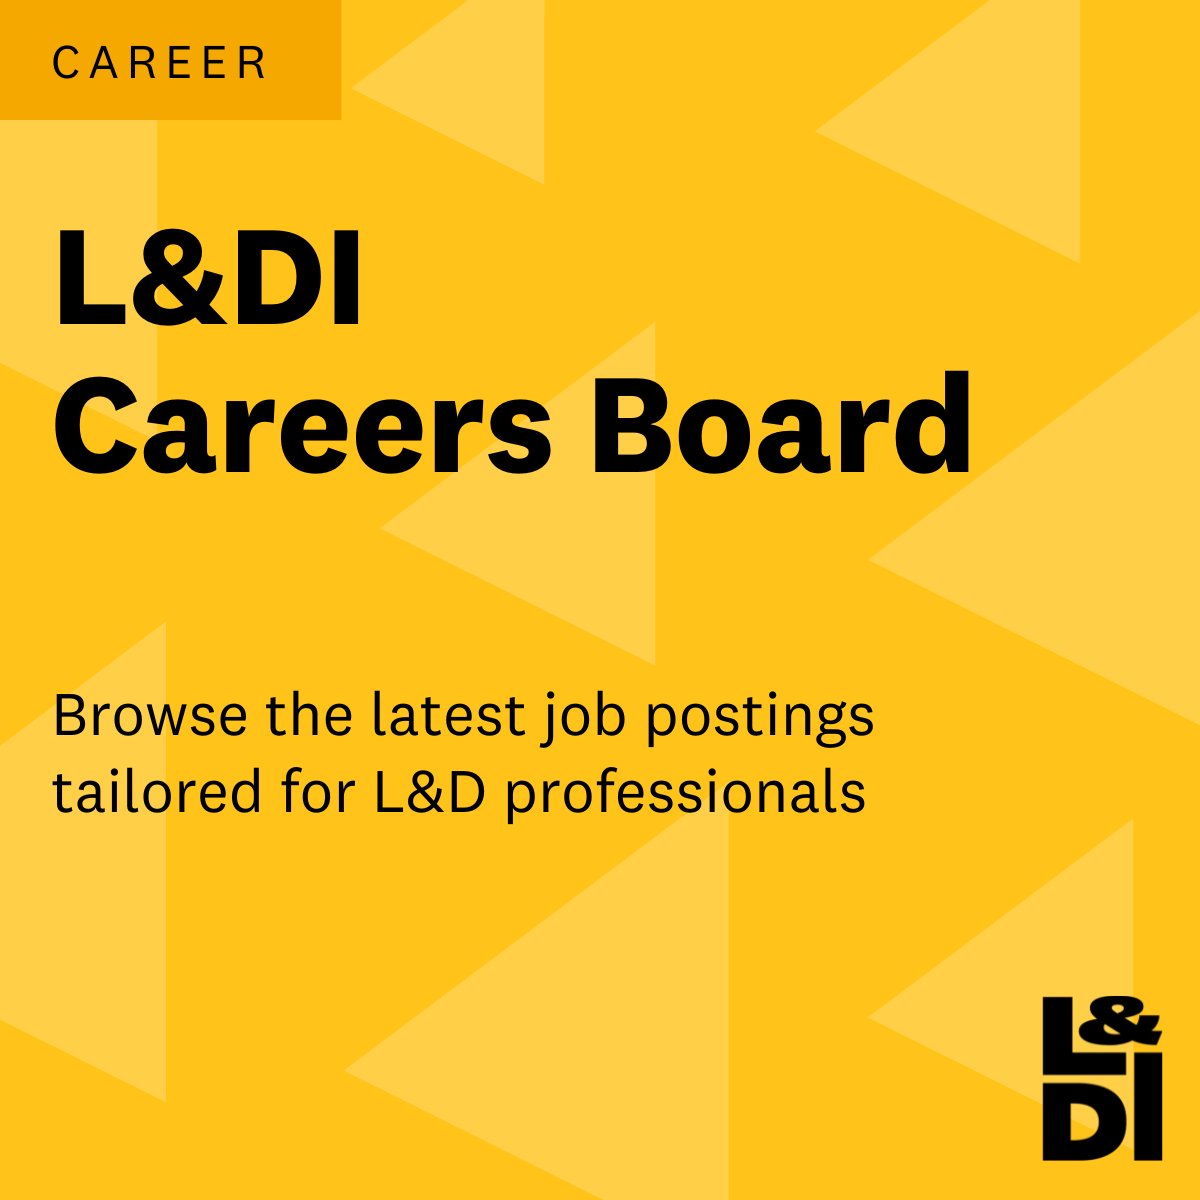 New roles constantly added to L&DI #Careers Board

Latest roles: L&D Specialist, T&D Manager, T&D Coach, L&D Manager, Learning & Leadership Manager.

L&DI members log in to view: bit.ly/3wsNDWz

#jobfairy #learninganddevelopment #career